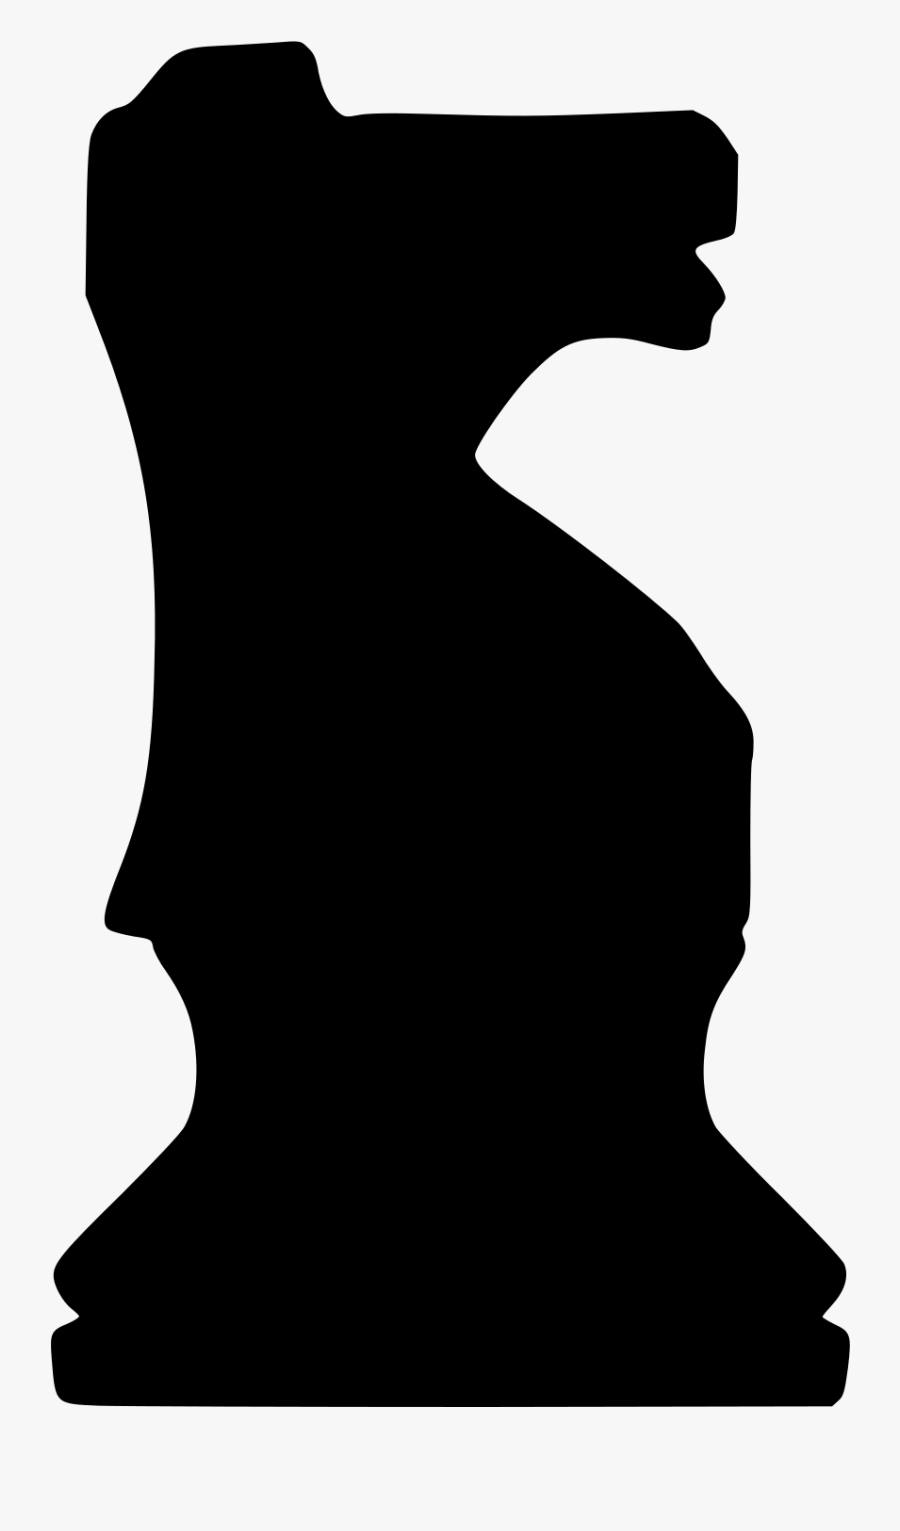 Chess Piece Silhouette Knight Queen - Knight Chess Piece Silhouette ...